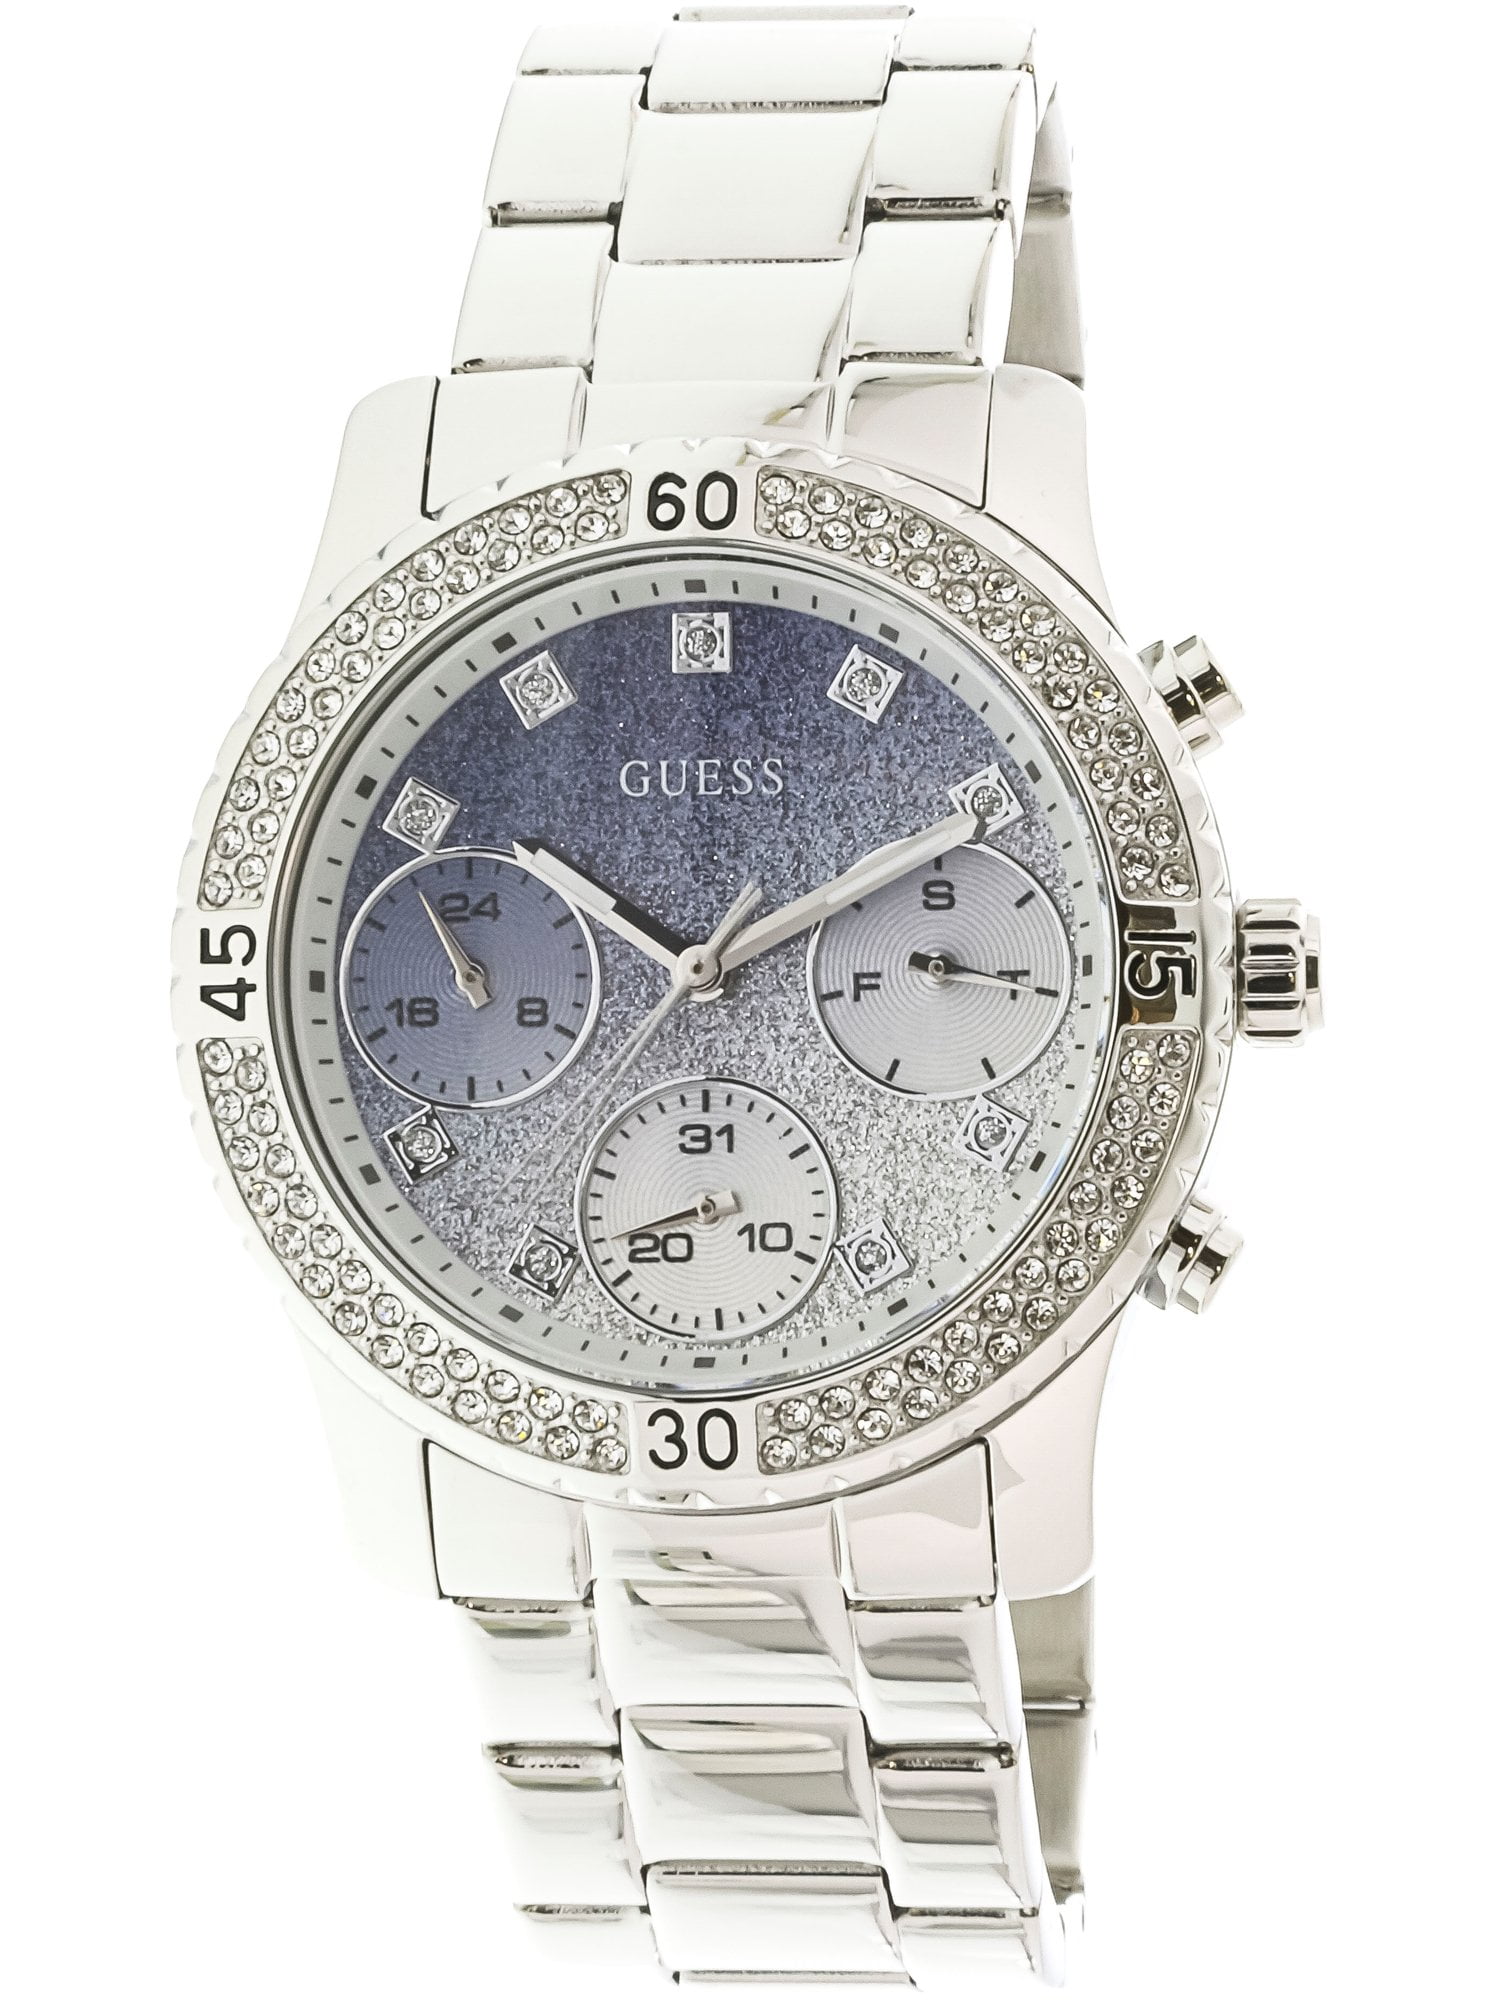 GUESS - GUESS Women's U0774L6 Silver Stainless-Steel Japanese Quartz